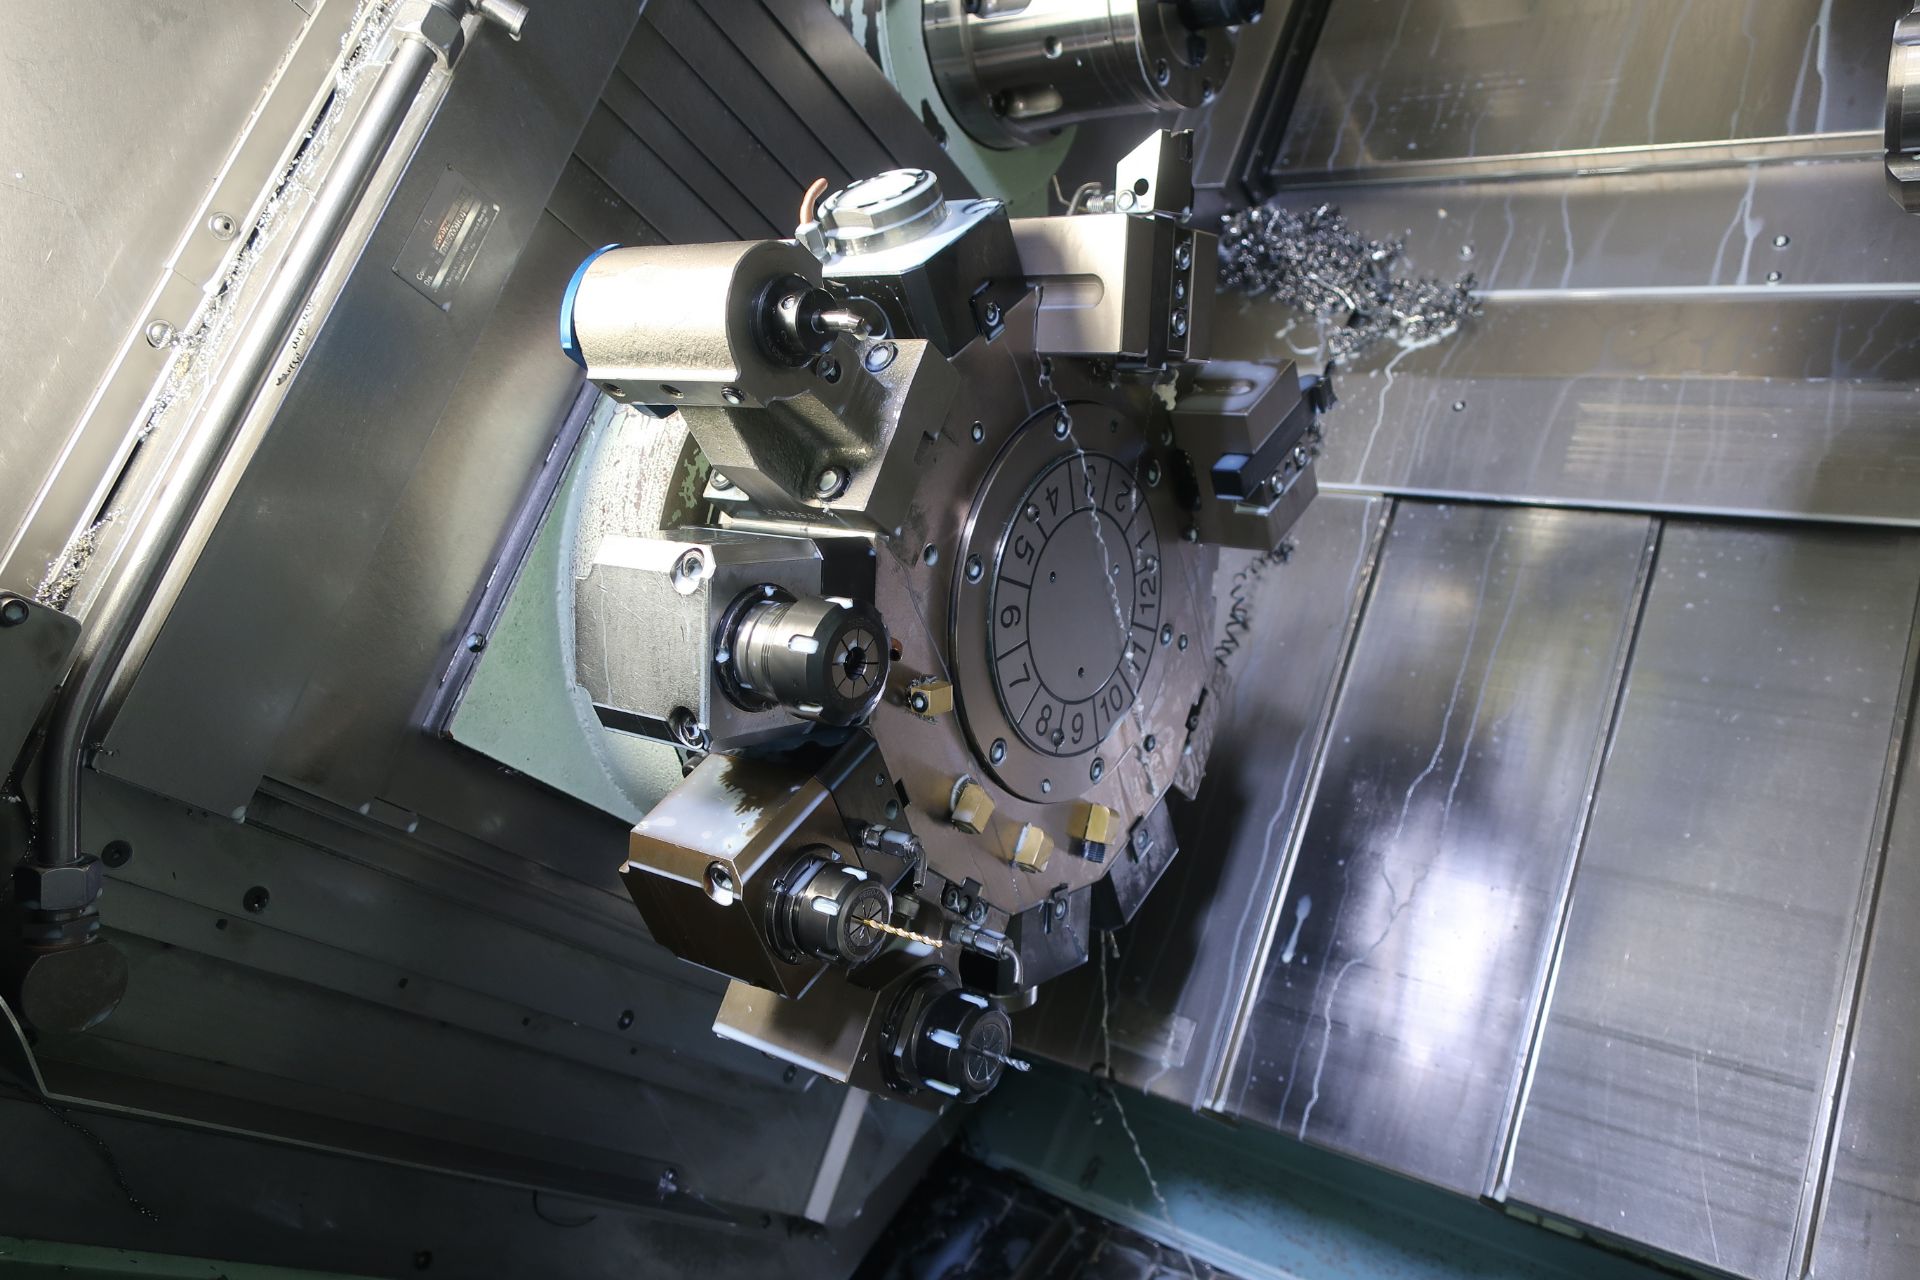 EUROTECH B465 Y2 QUATROFLEX TWIN SPINDLE TWIN TURRET CNC LATHE W/DUAL Y-AXIS, NEW 2011, SN 11129 - Image 7 of 19